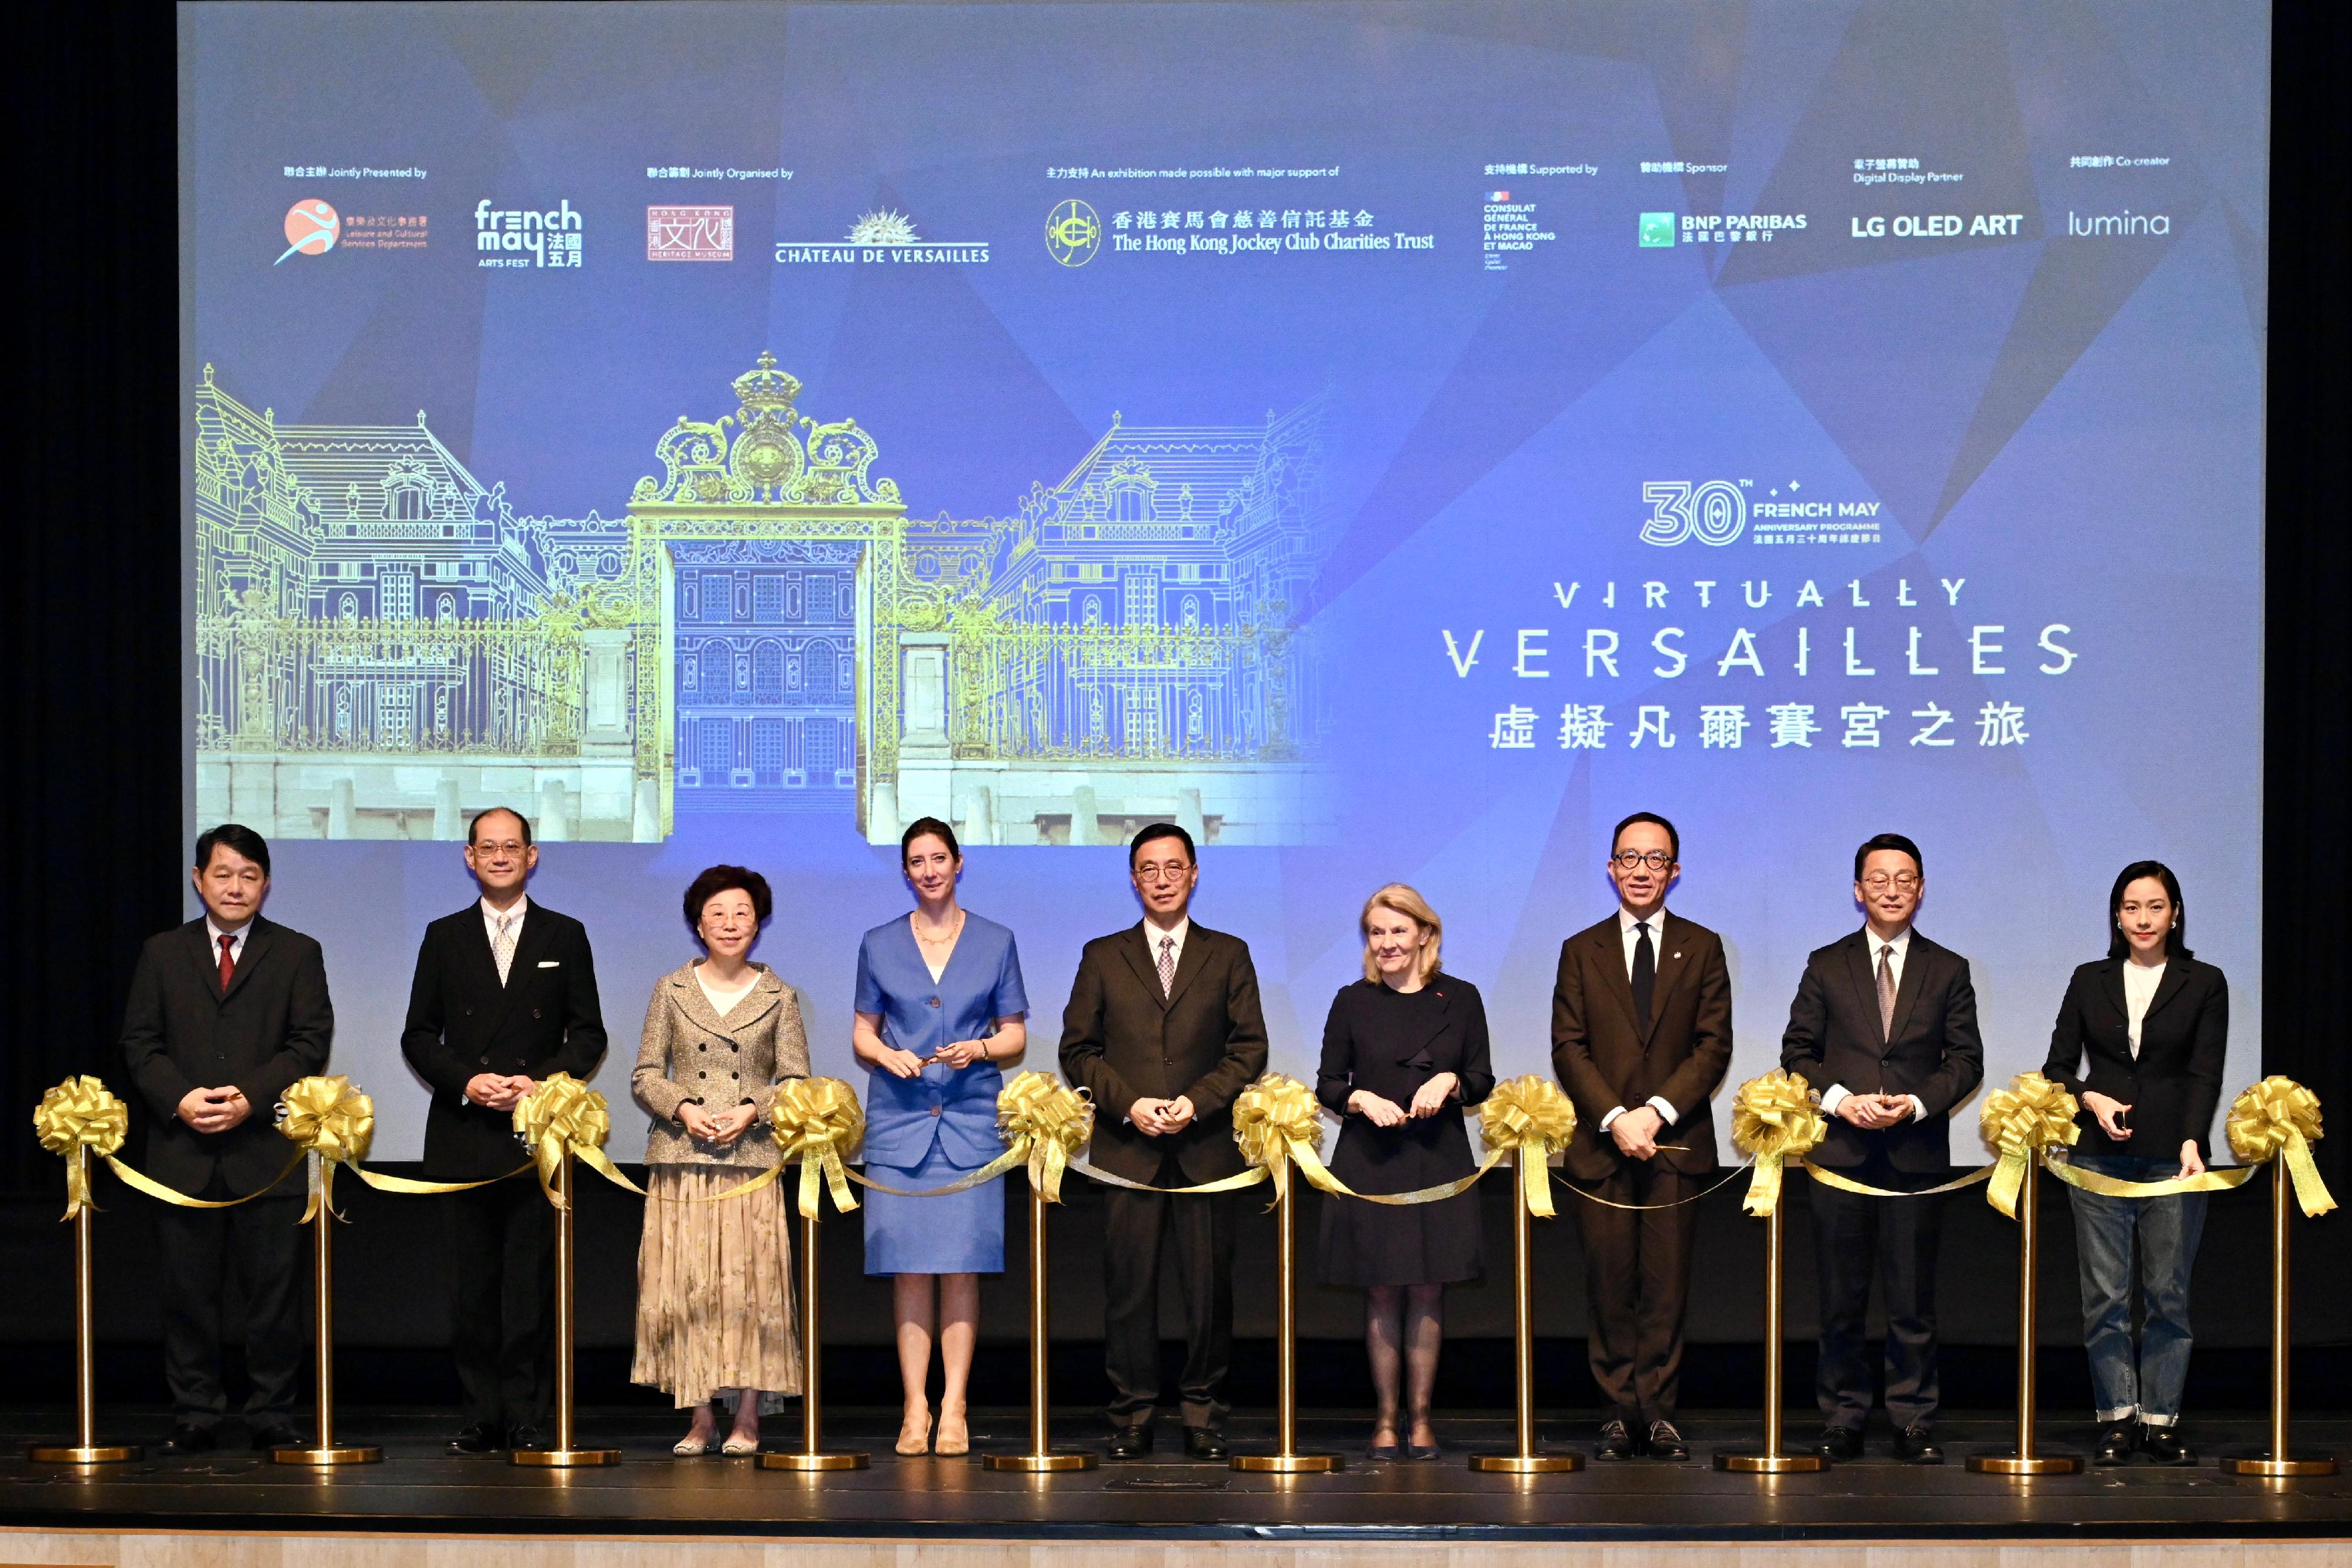 The opening ceremony for the exhibition "Virtually Versailles" was held today (April 19) at the Hong Kong Heritage Museum (HKHM). Photo shows officiating guests (from left) the Museum Director of the HKHM, Mr Brian Lam; the Chief Executive Officer, Hong Kong, BNP Paribas, Mr Hugo Leung; the Co-Chairman of the Board of French May Arts Festival, Mrs Mignonne Cheng; the Consul General of France in Hong Kong and Macau, Mrs Christile Drulhe; the Secretary for Culture, Sports and Tourism, Mr Kevin Yeung; the President of Palace of Versailles, Ms Catherine Pégard; the Executive Director, Charities and Community of the Hong Kong Jockey Club, Dr Gabriel Leung; the Director of Leisure and Cultural Services, Mr Vincent Liu; and the Ambassador of French May Arts Festival, Ms Karena Lam, at the event. 